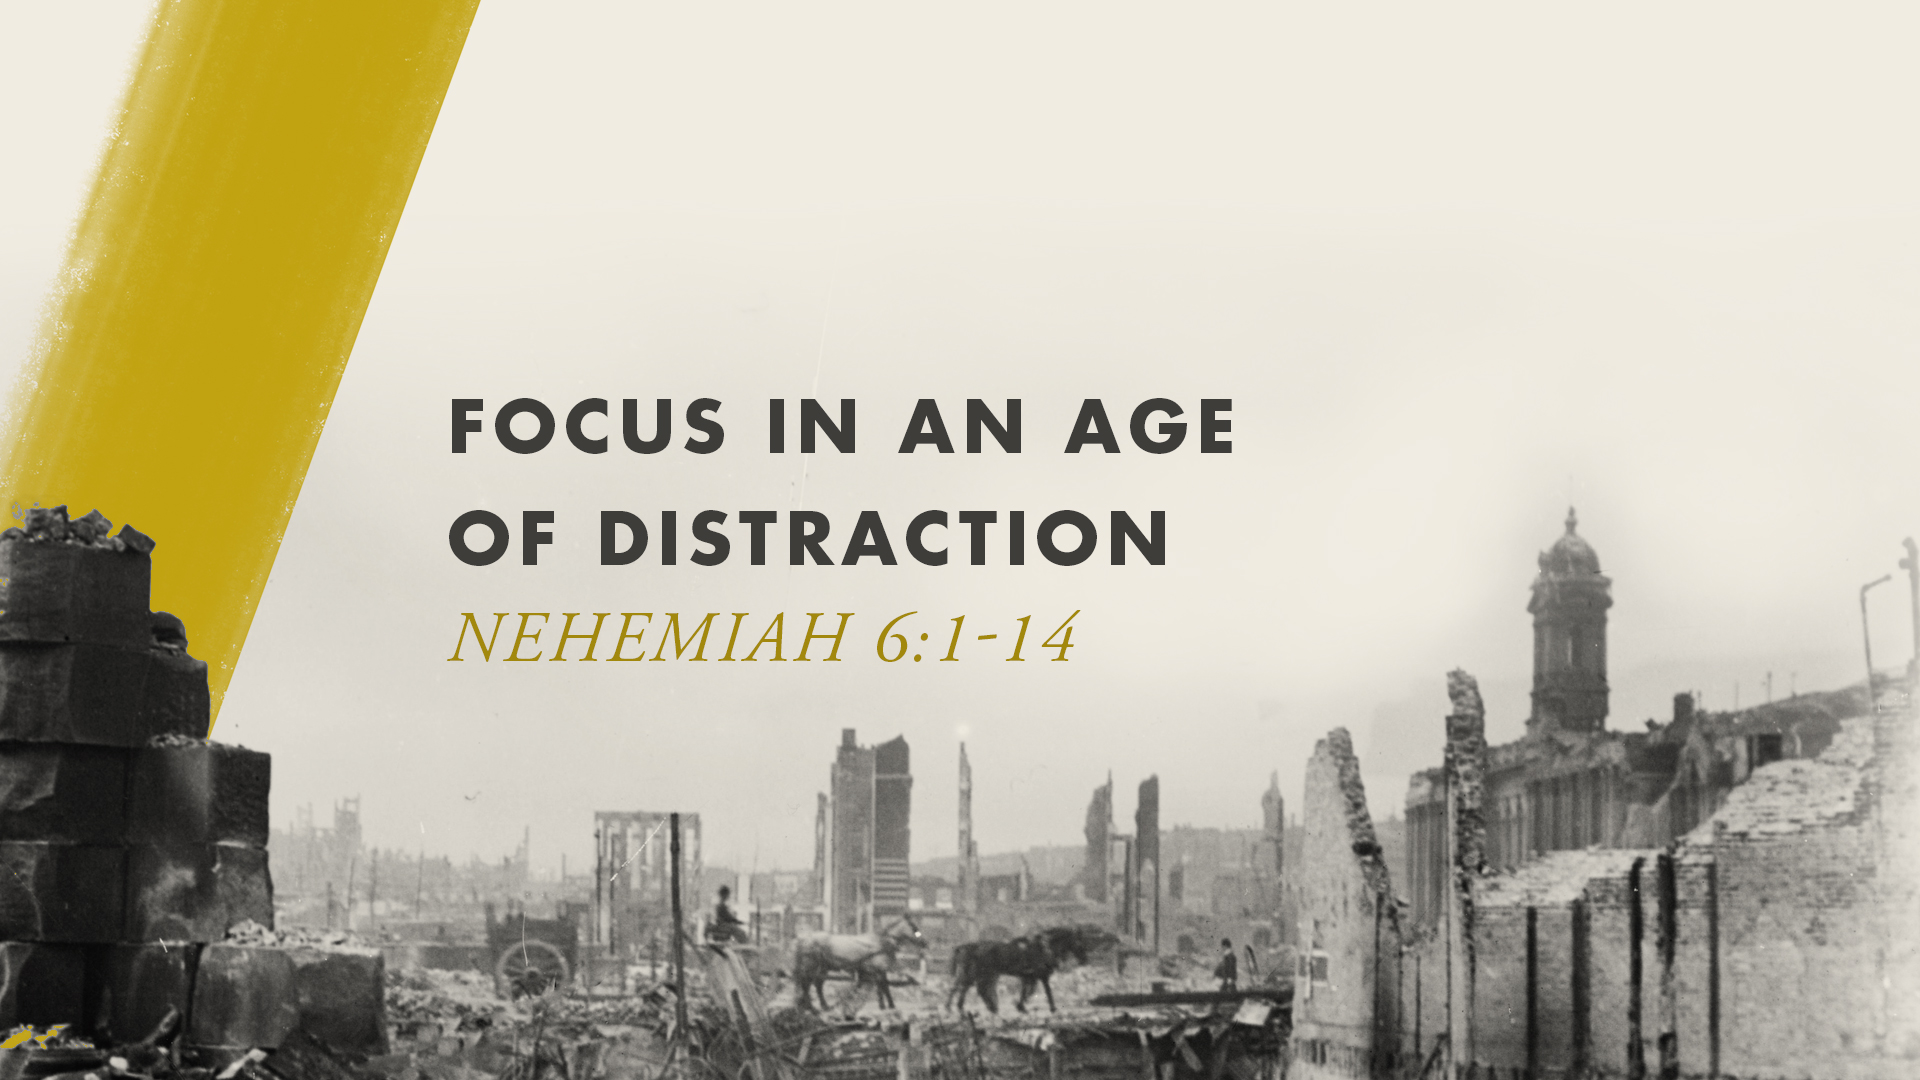 Focus in an Age of Distraction